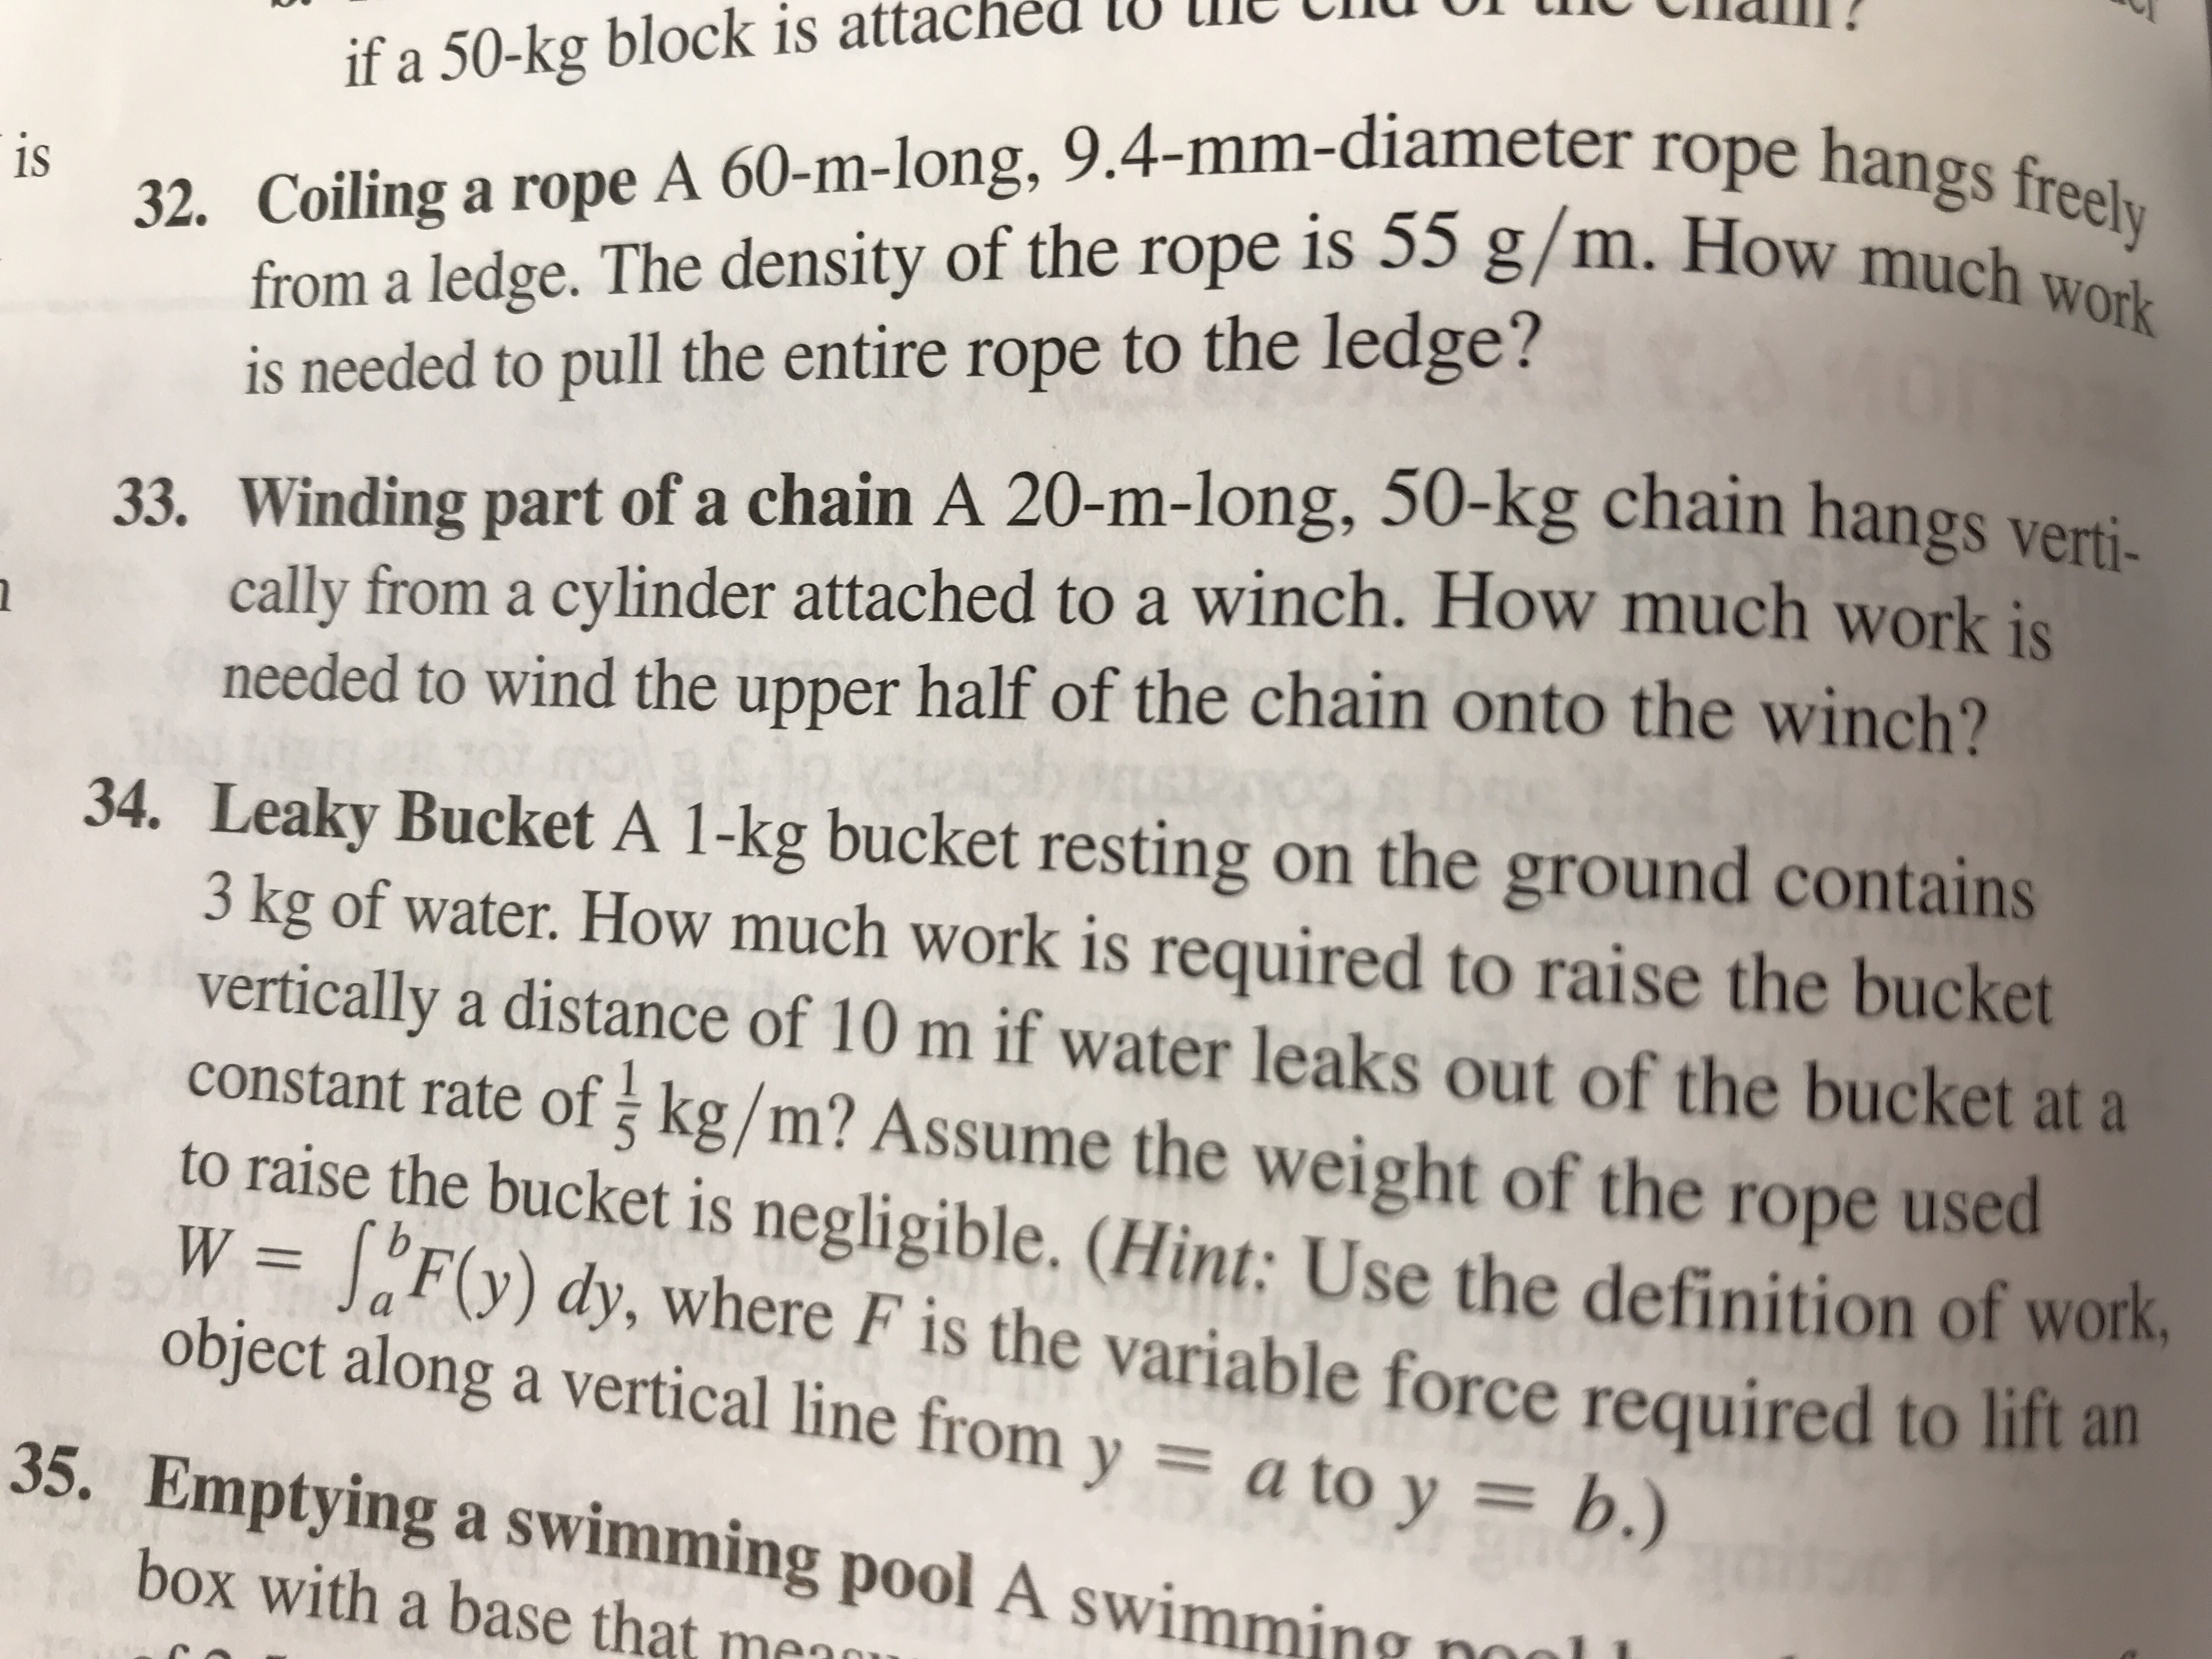 u
Cilalll!
if a 50-kg block is attached l0 le
from a ledge. The density of the rope is 55 g/m. How ms eely
is needed to pull the entire rope to the ledge?
iS
32. Coiling a rope A 60-m-long, 9.4-mm-diameter rope hangs
33. Winding part of a chain A 20-m-long, 50-kg chain hangs verti-
ally from a cylinder attached to a winch. How much work is
needed to wind the upper half of the chain onto the winch?
34. Leaky Bucket A 1-kg bucket resting on the ground contains
3 kg of water. How much work is required to raise the bucket
vertically a distance of 10 m if water leaks out of the bucket at a
constant rate of j kg/m? Assume the weight of the rope used
to raise the bucket is negligible. (Hint: Use the definition of work
W SF() dy, where F is the variable force required to lift a
object along a vertical line from y a to y b
35. Emptying a swimming pool A swim
box with a base that mennu
ming noal
